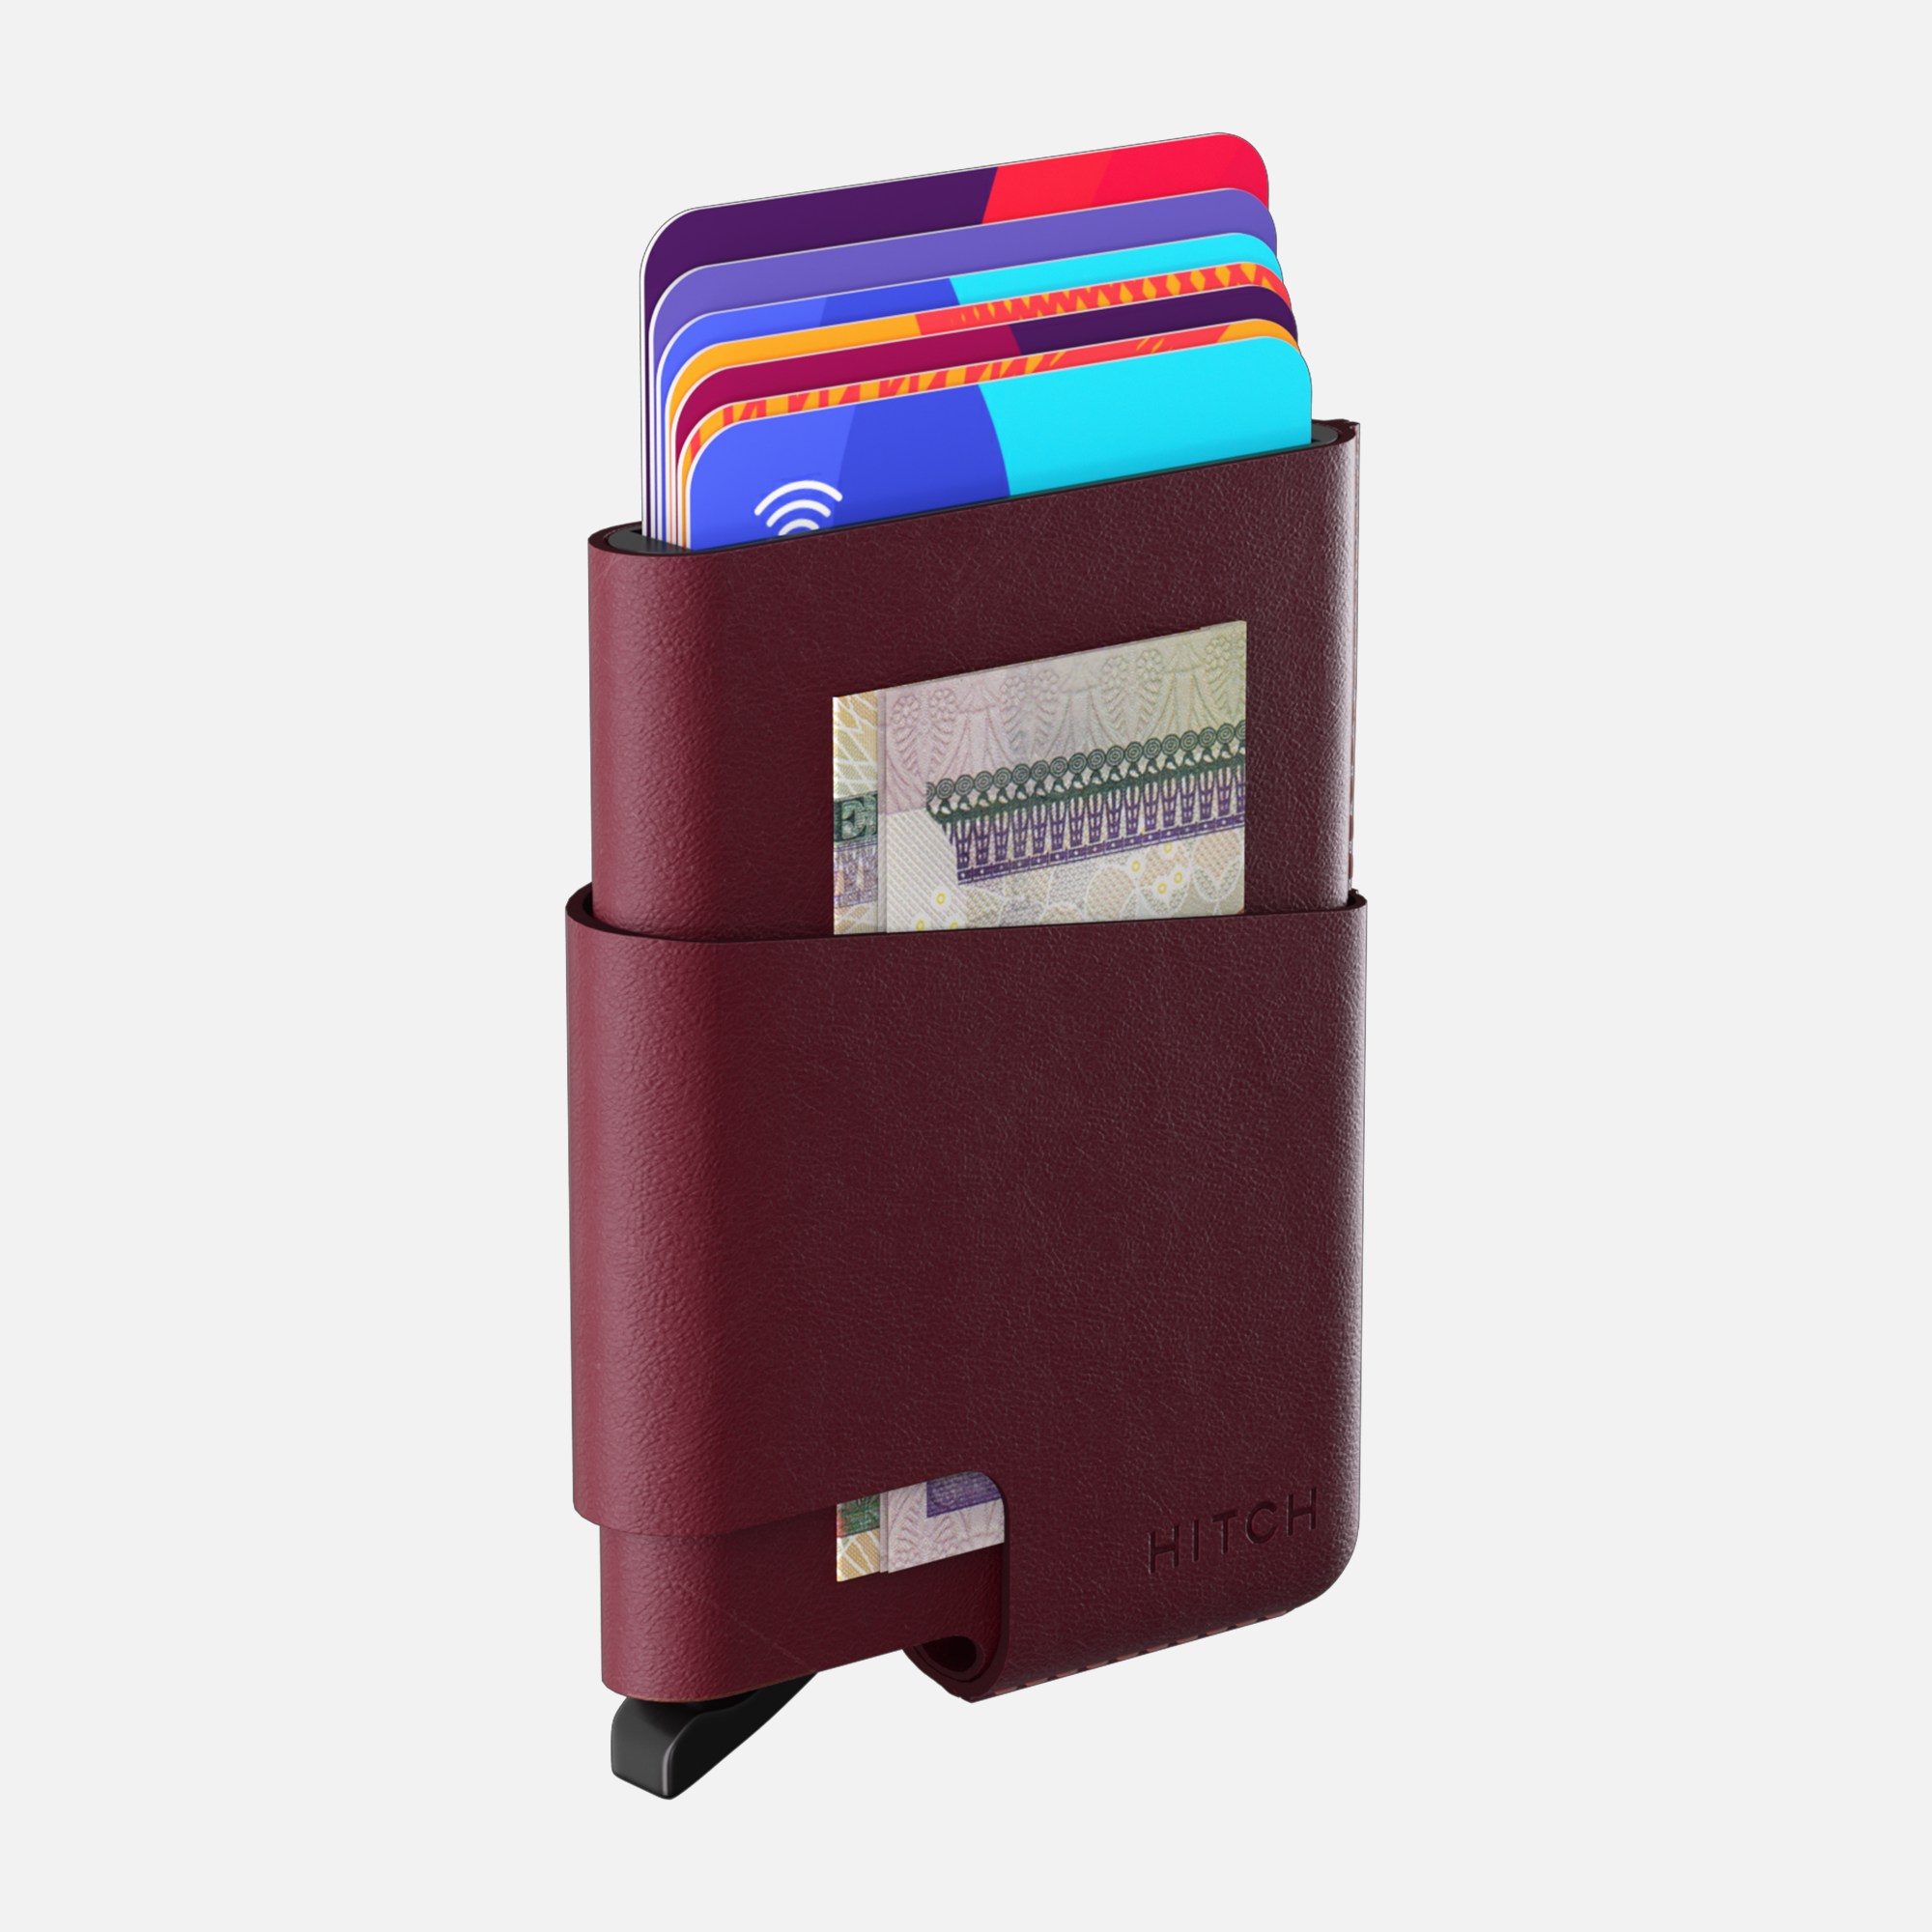 CUT-OUT Cardholder - RFID Block Featured - Handmade Natural Genuine Leather - Burgundy